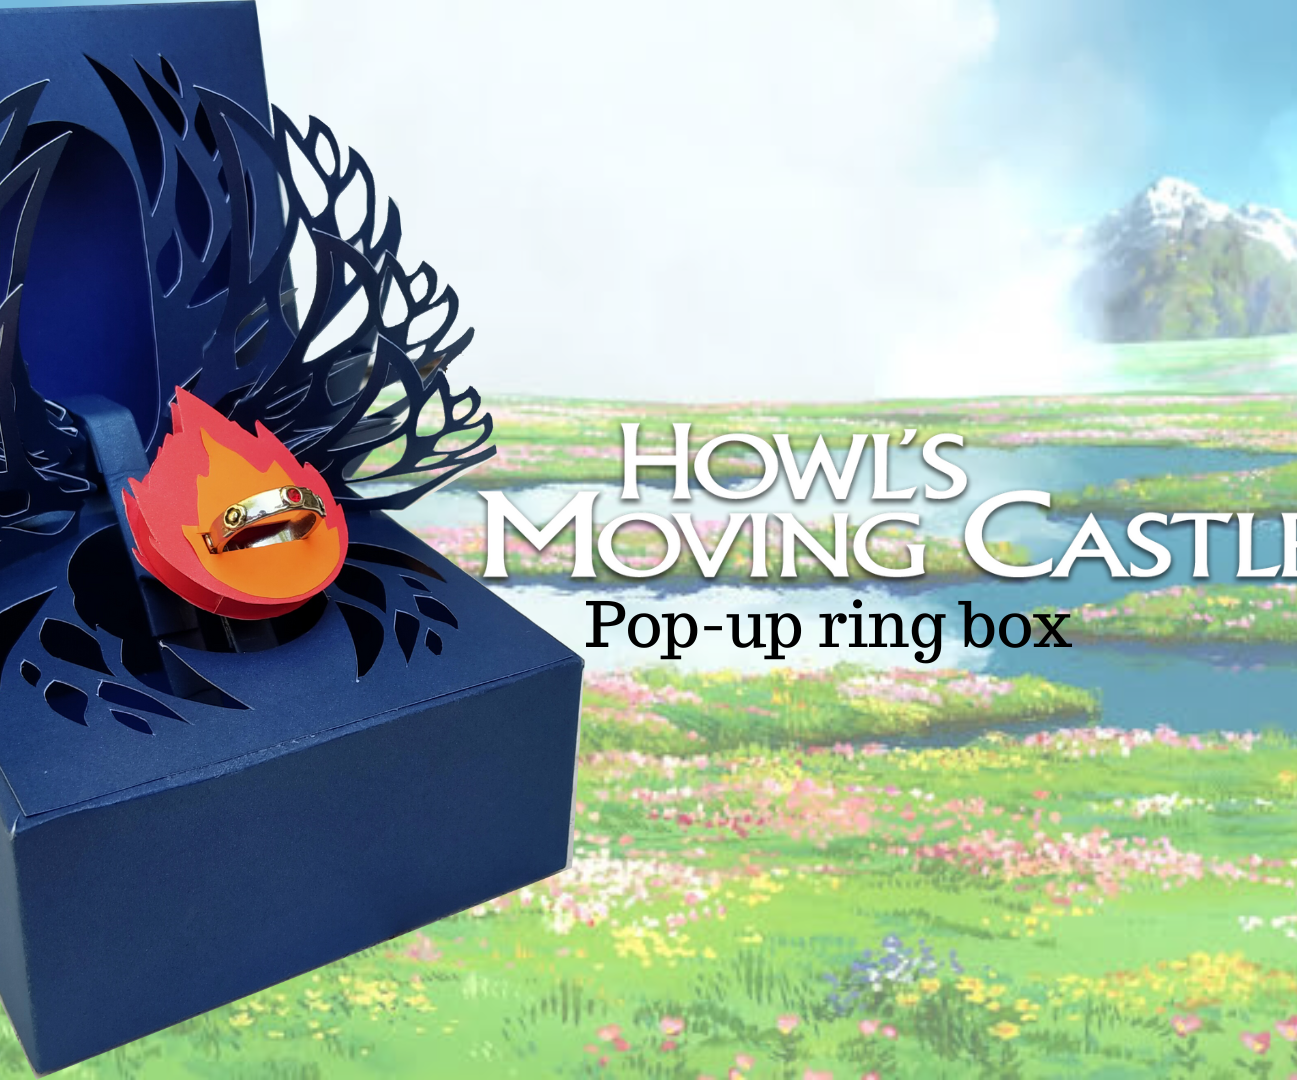 DIY Pop-Up Ring Box Inspired by Studio Ghibli's "Howl's Moving Castle"